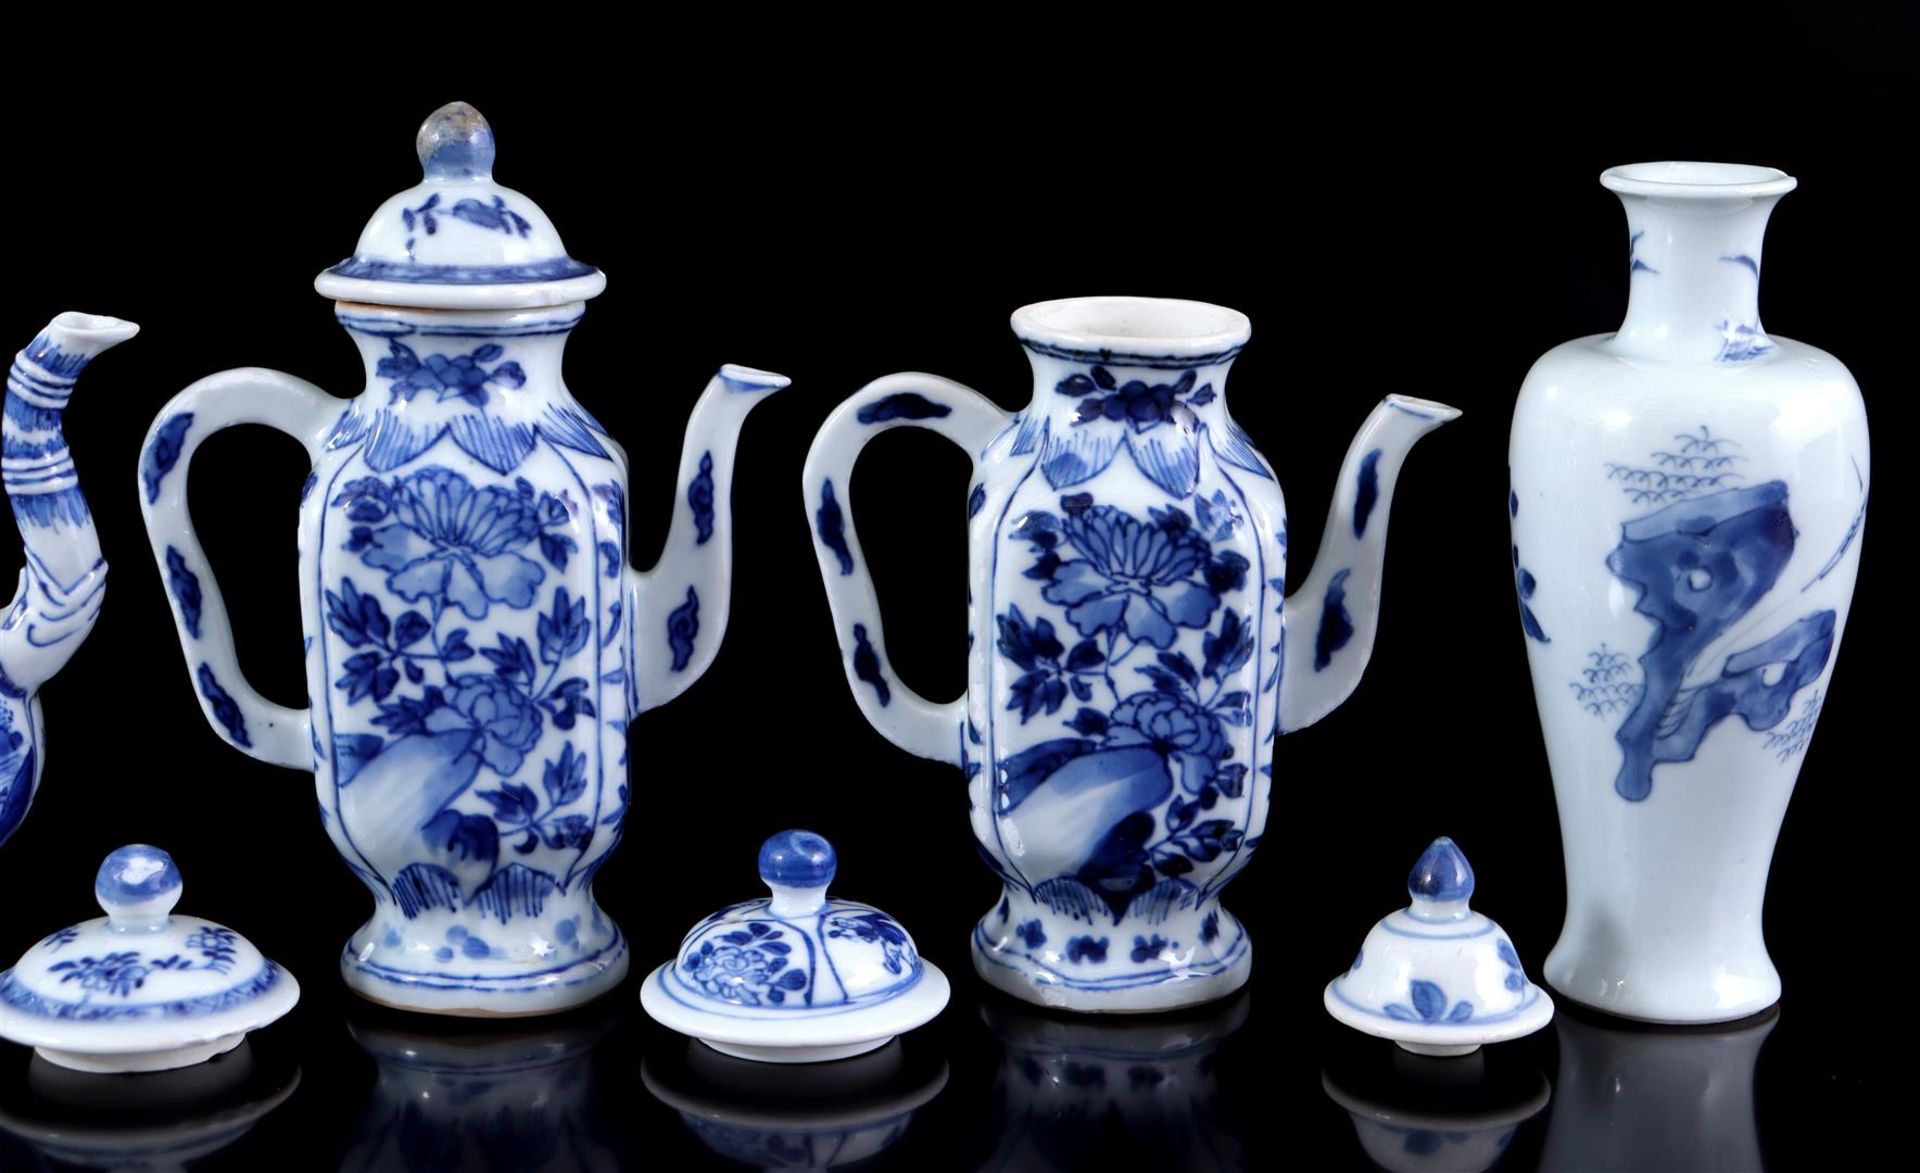 Porcelain miniature jugs, lidded pots and loose lids, China 18th/19th century - Image 3 of 6